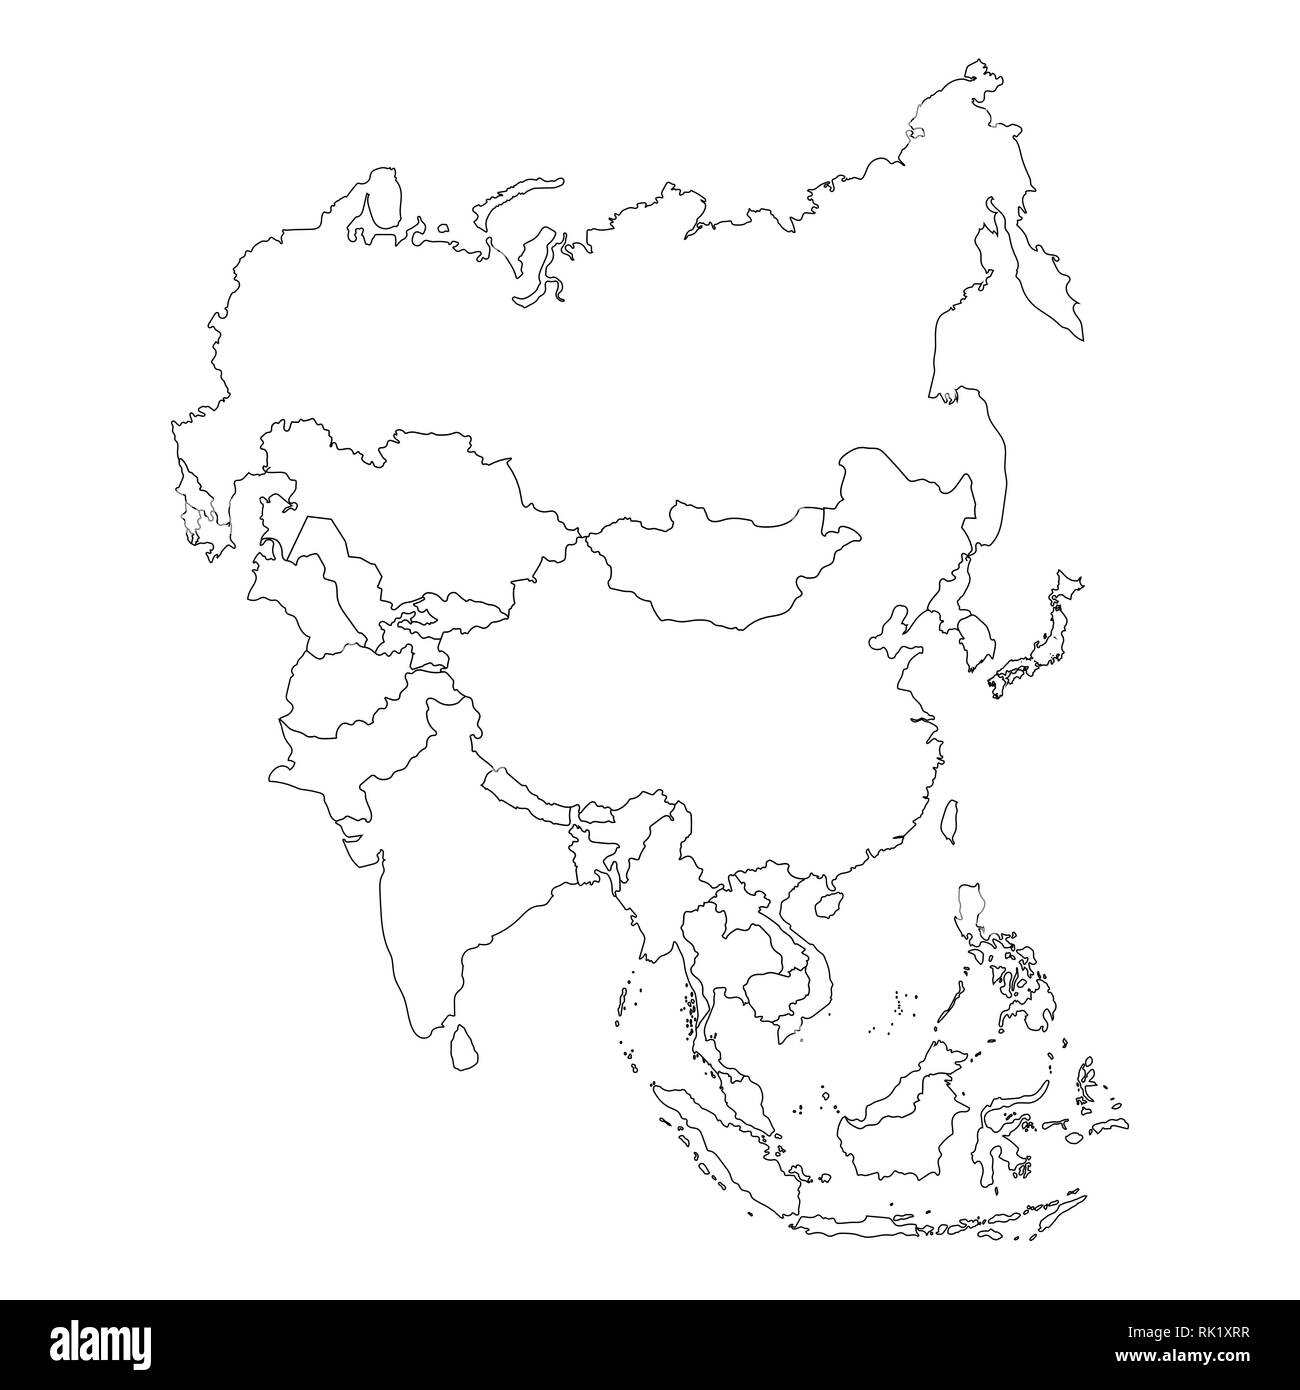 Vector illustration Asia outline map isolated on white background